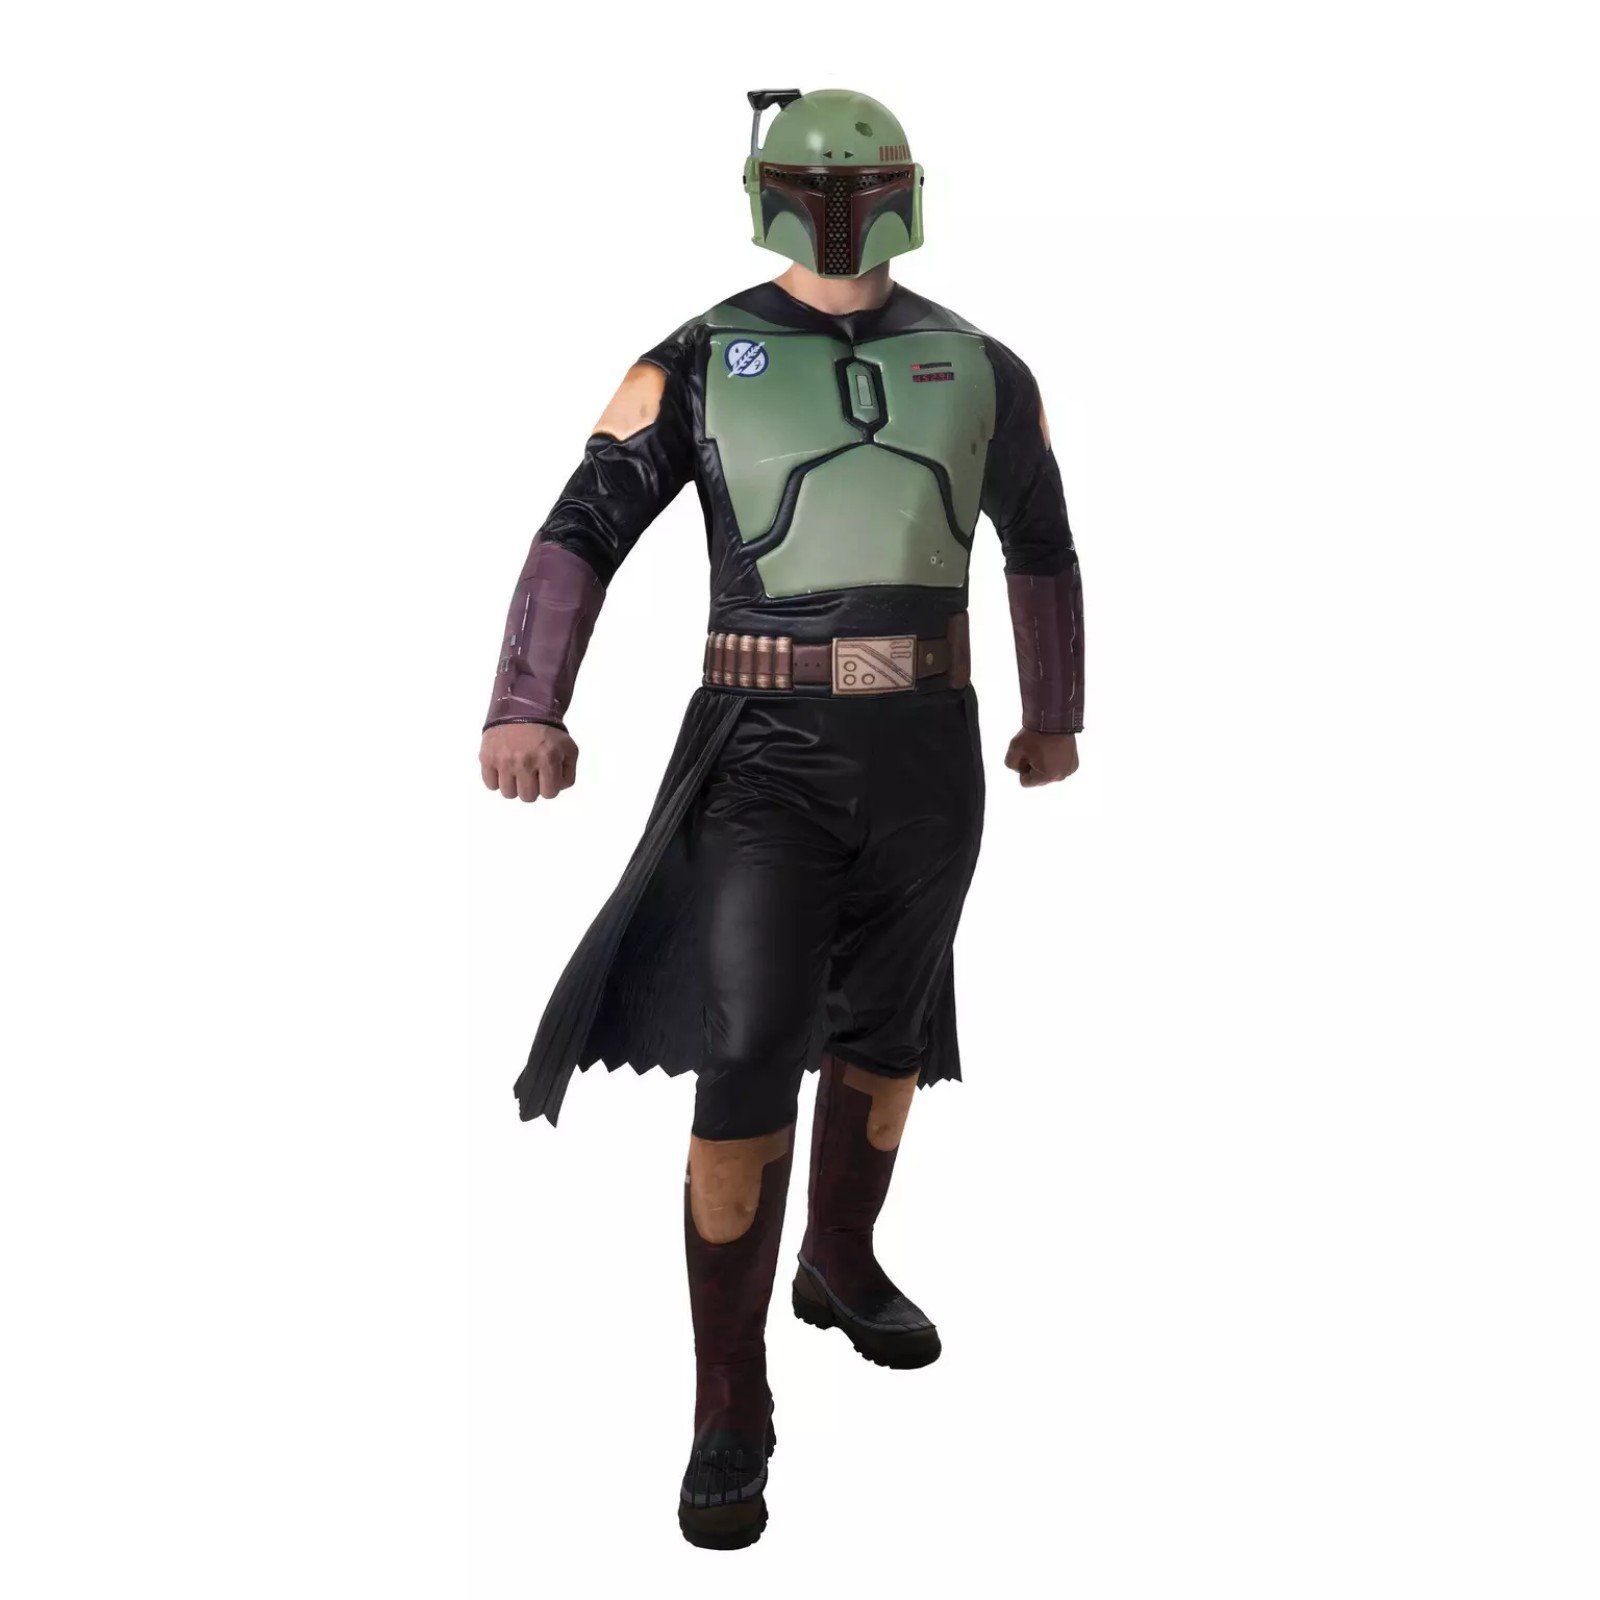 Boba Fett Adult Costume STANDARD AND XL ARE AVAILABLE EWSus2tNw